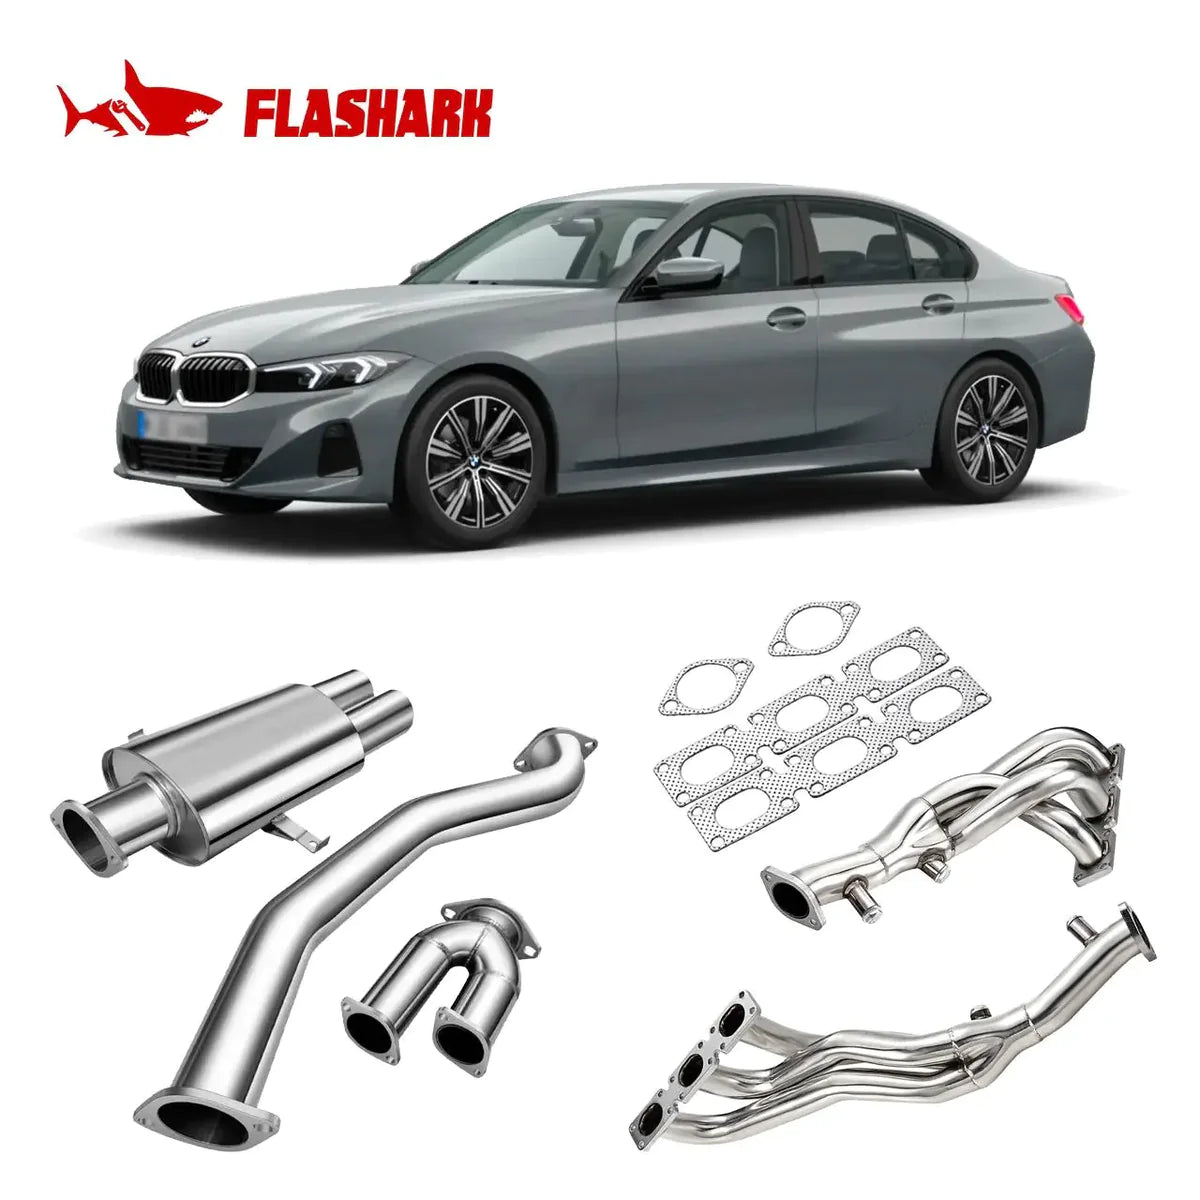 Exhaust Header/Catback Exhaust All-In-One Kit for 1994-1997 BMW M52 Engine E36